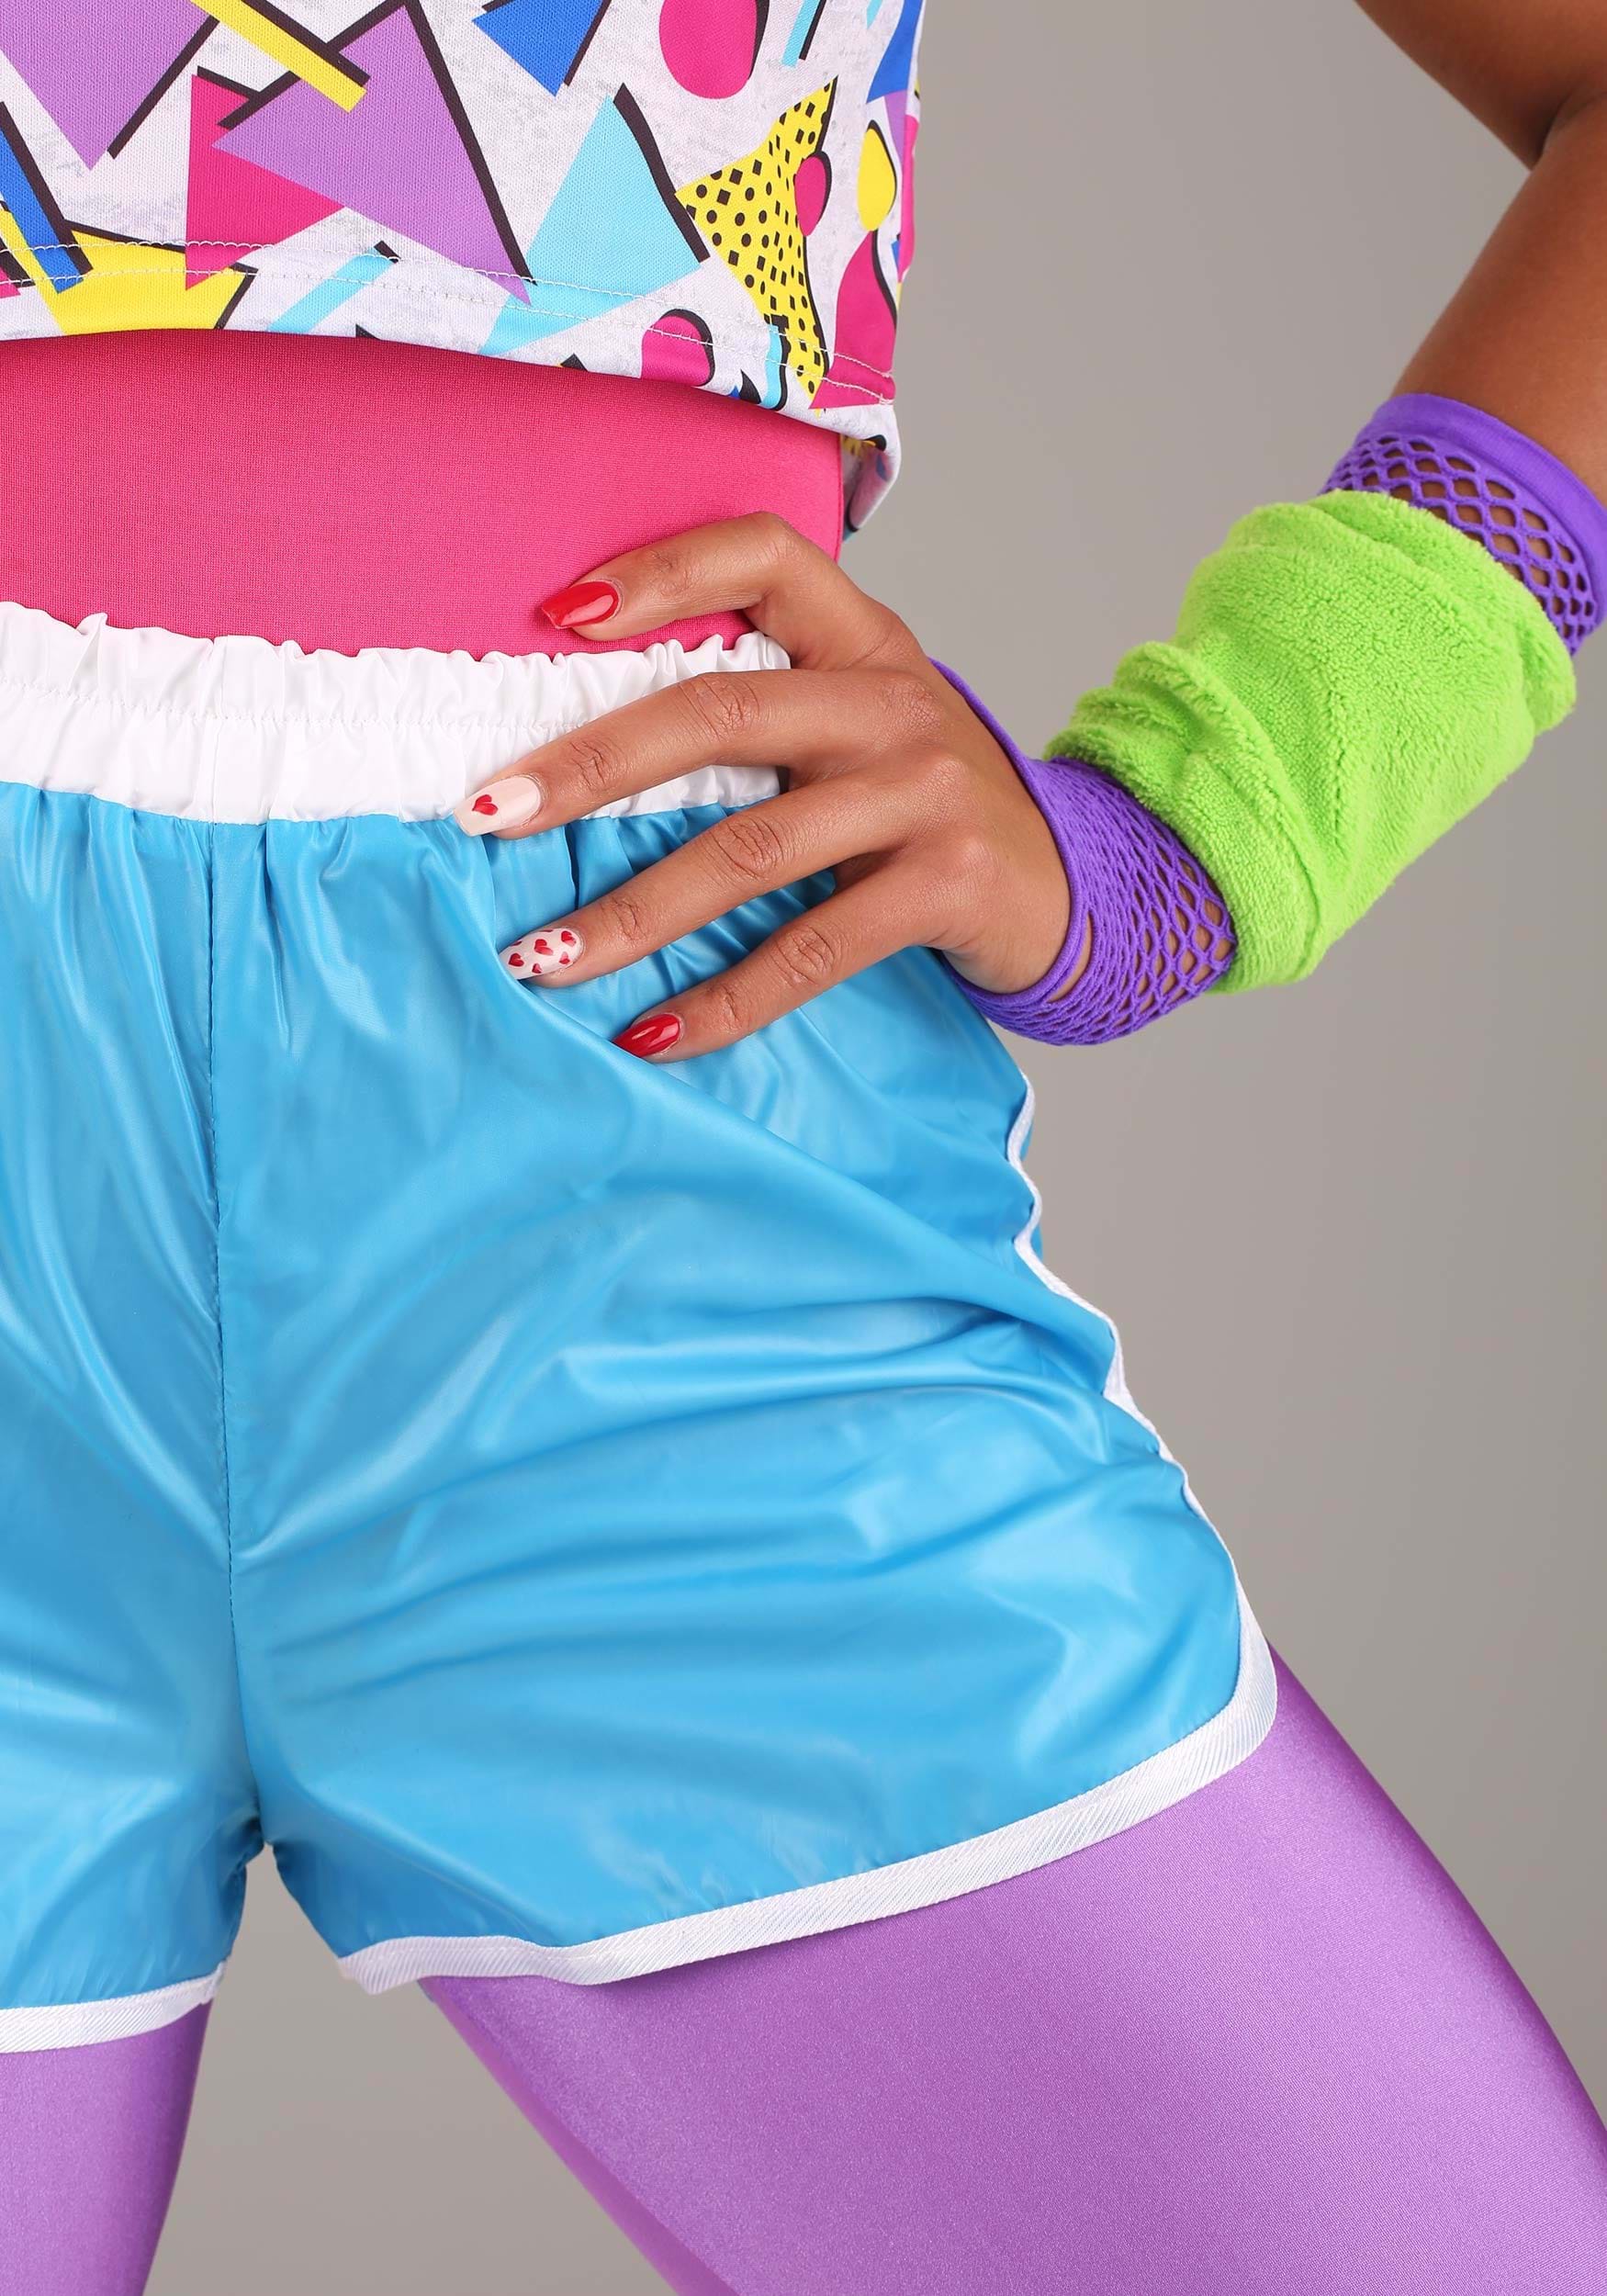 Work It Out 80s Costume For Women